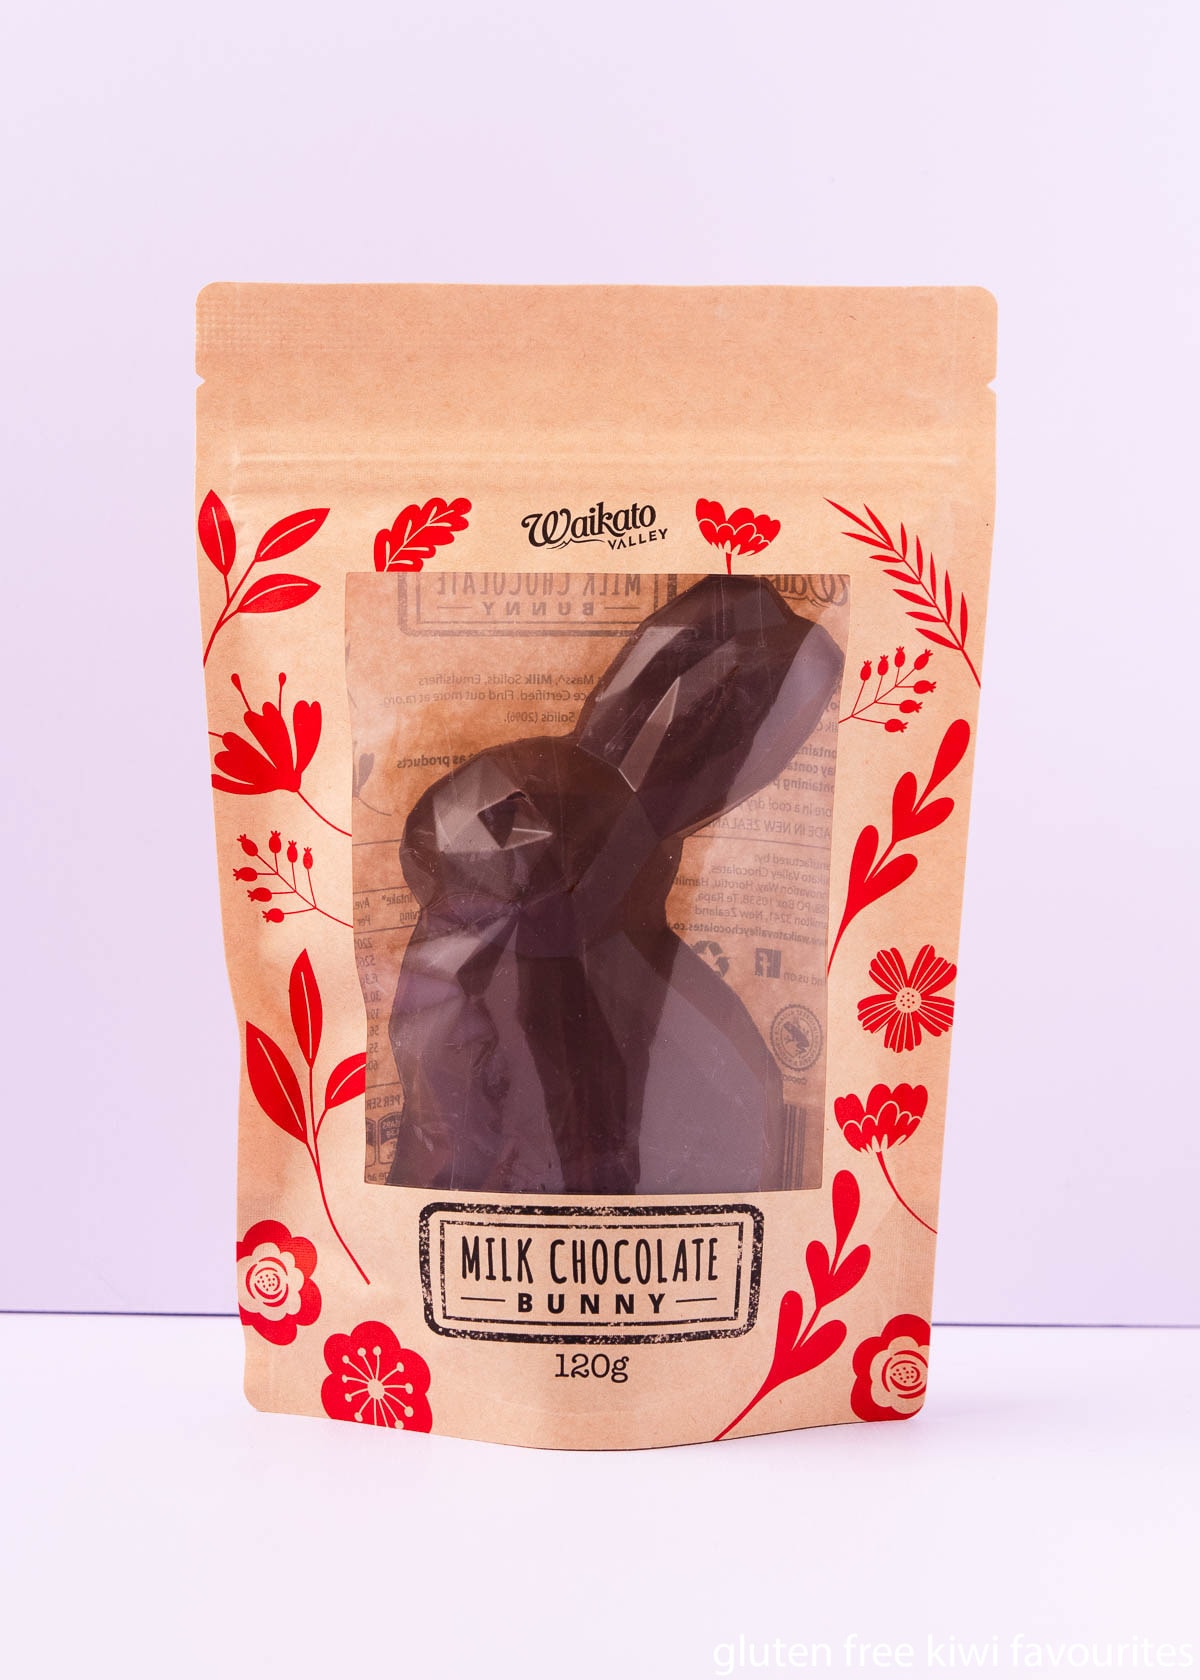 A Waikato Valley milk chocolate bunny in packaging that is brown with red floral pattern, and a clear window showing the bunny. 